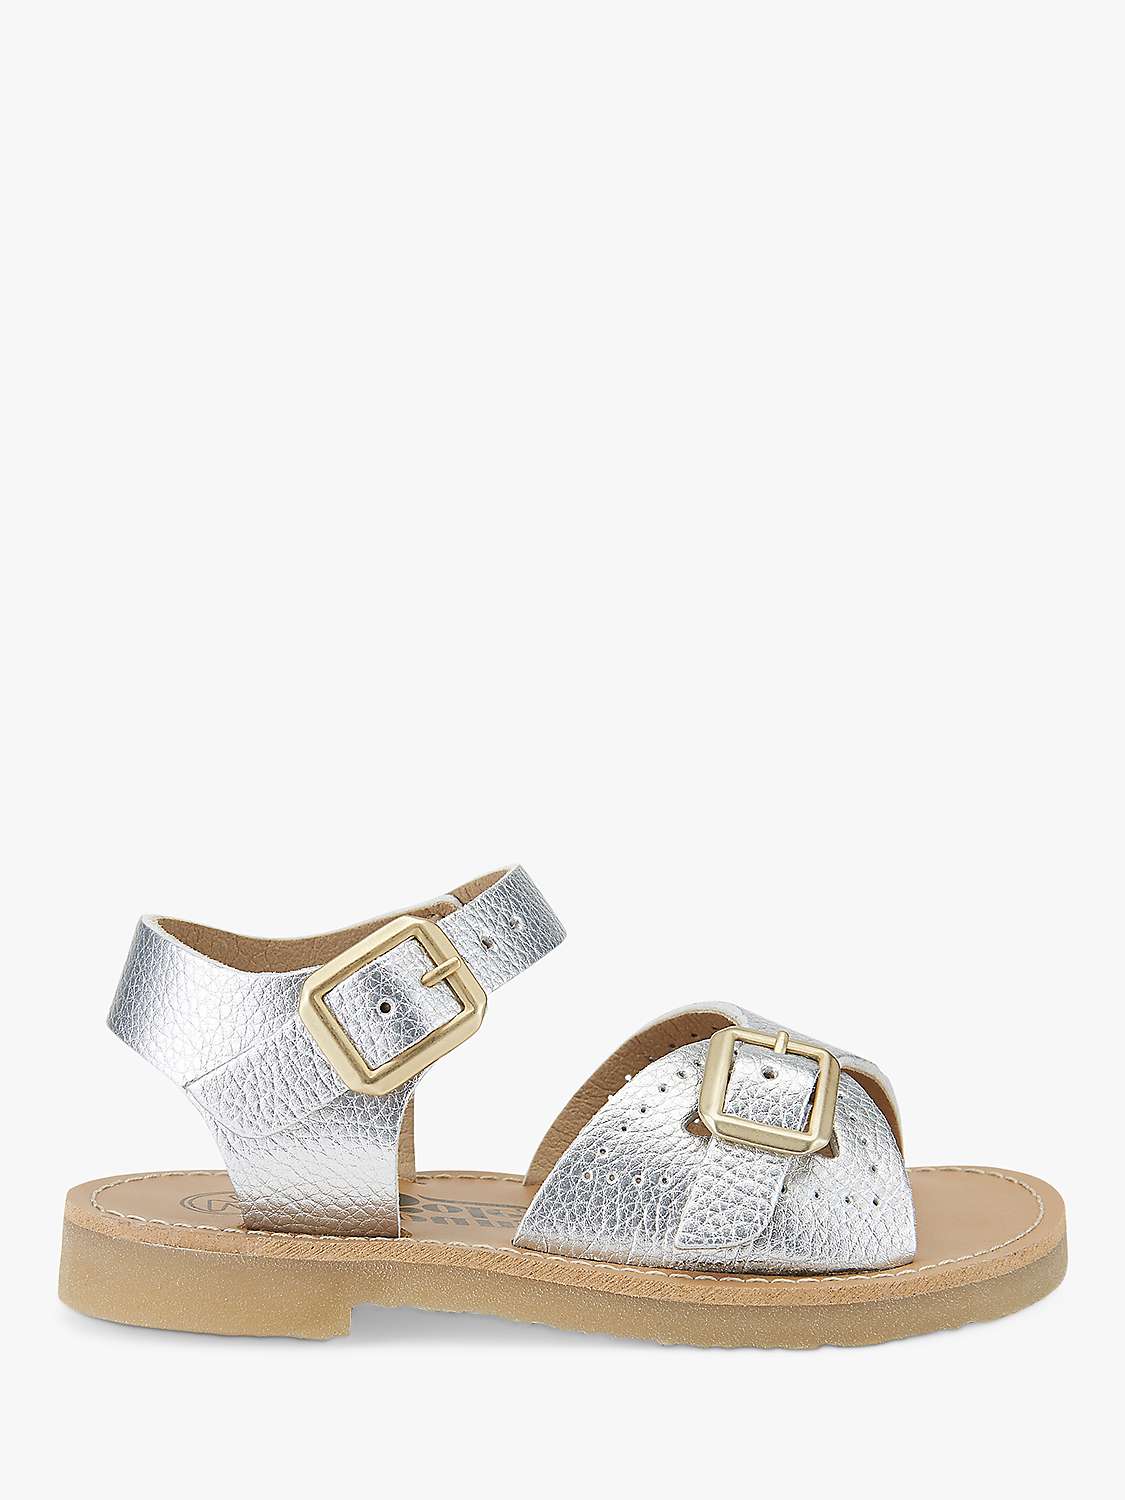 Buy Young Soles Kids' Pearl Vegan Two Part Sandals Online at johnlewis.com